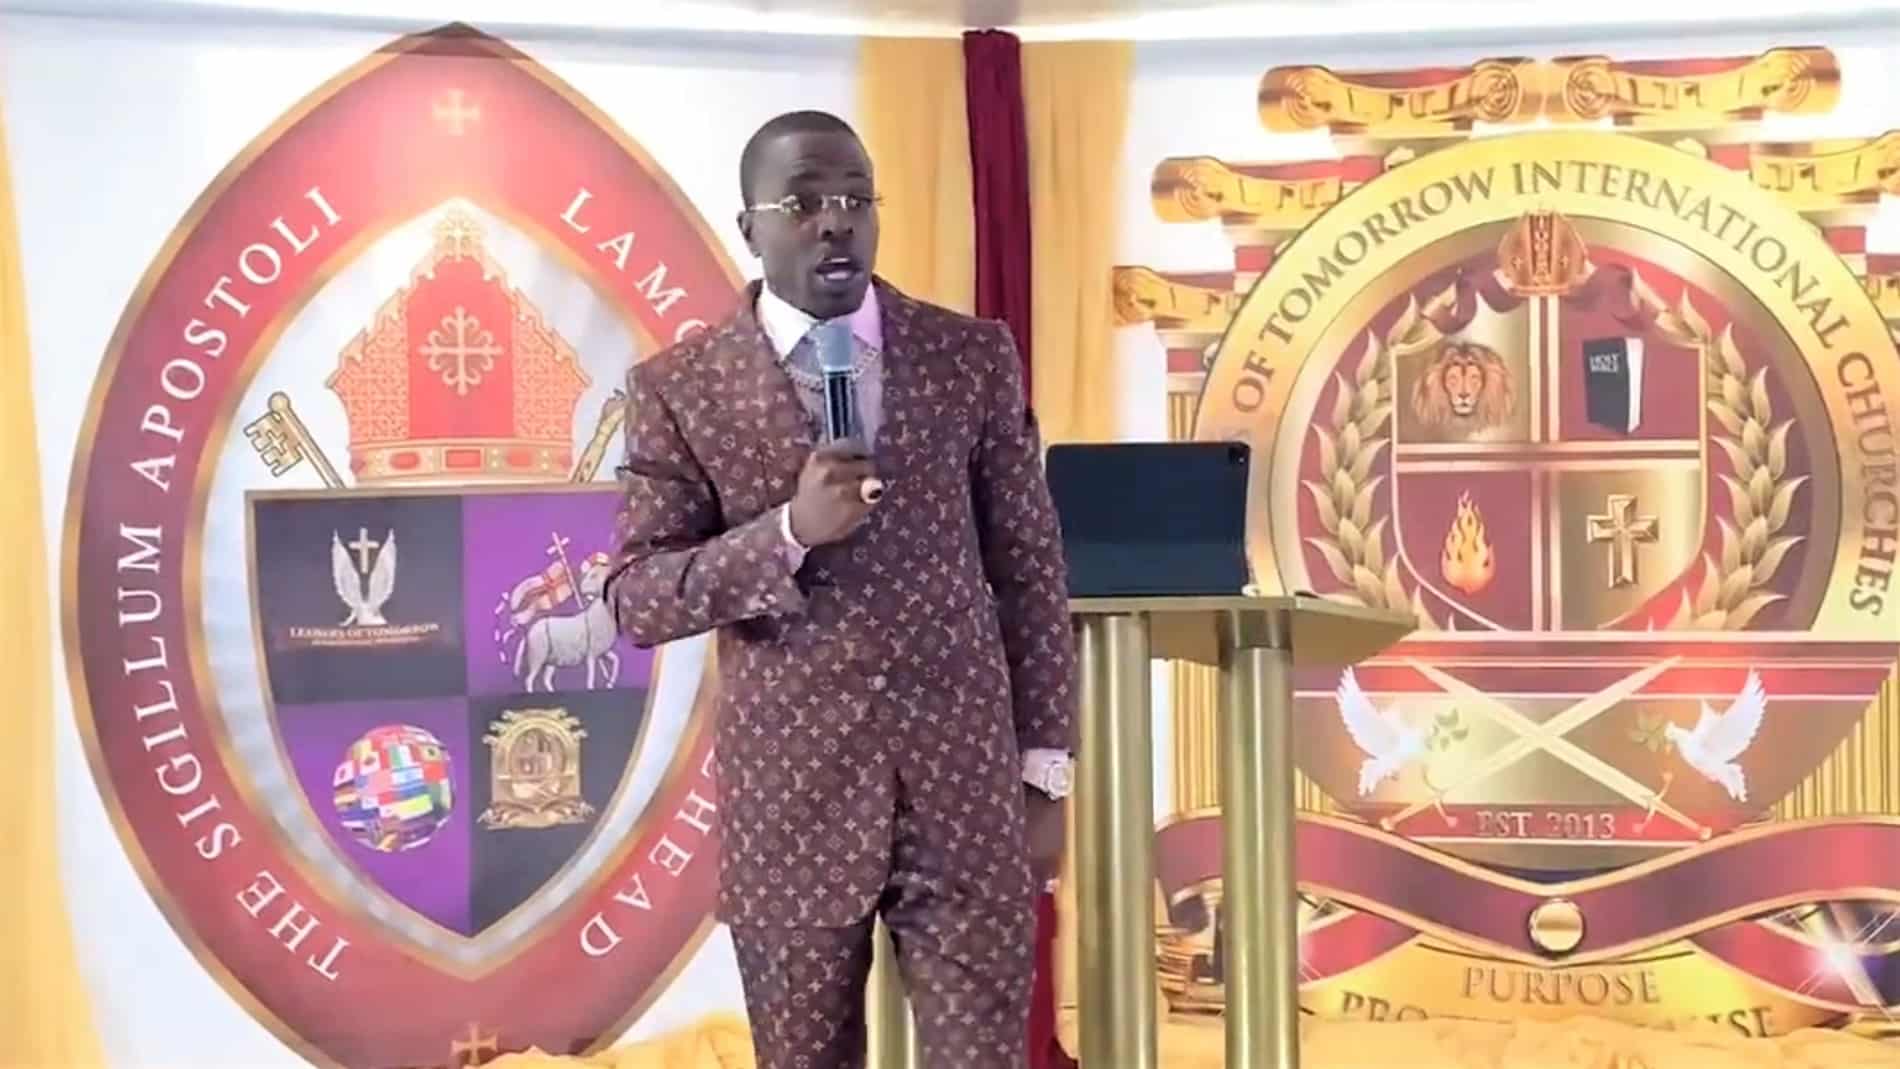 Thieves Nab $1 Million in Jewelry from Flashy NYC Pastor During Service